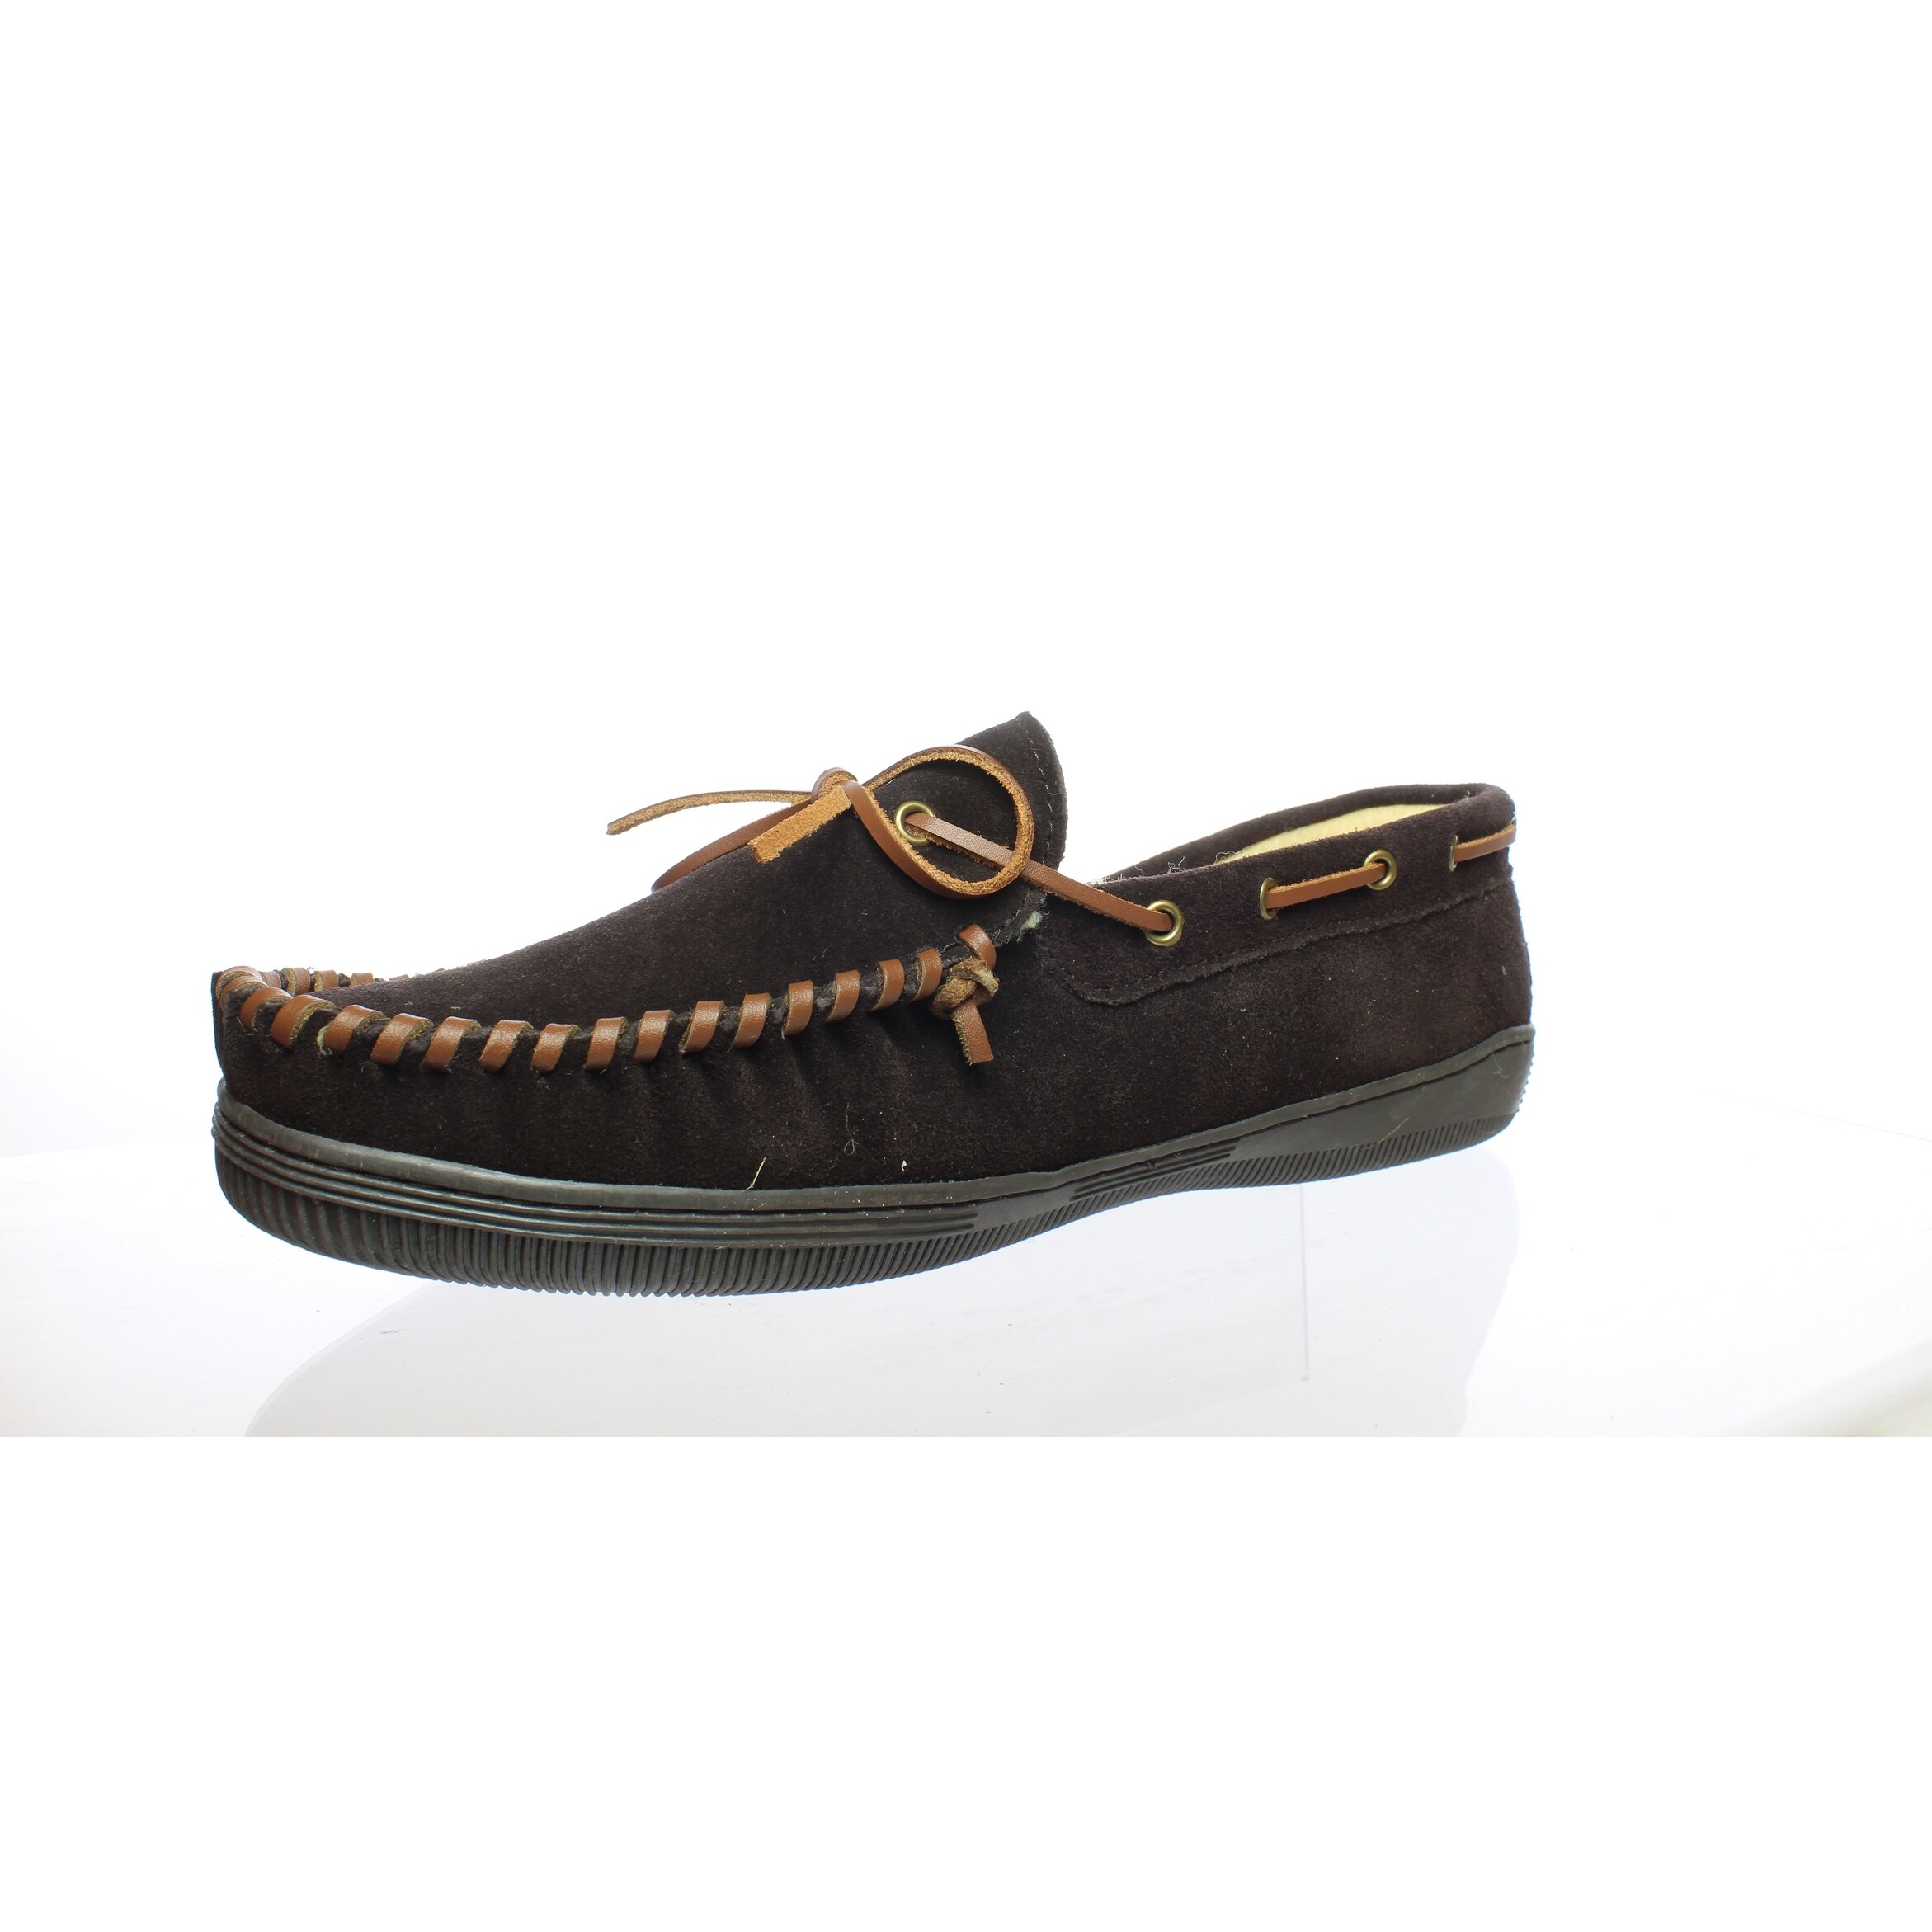 roots moccasin slippers